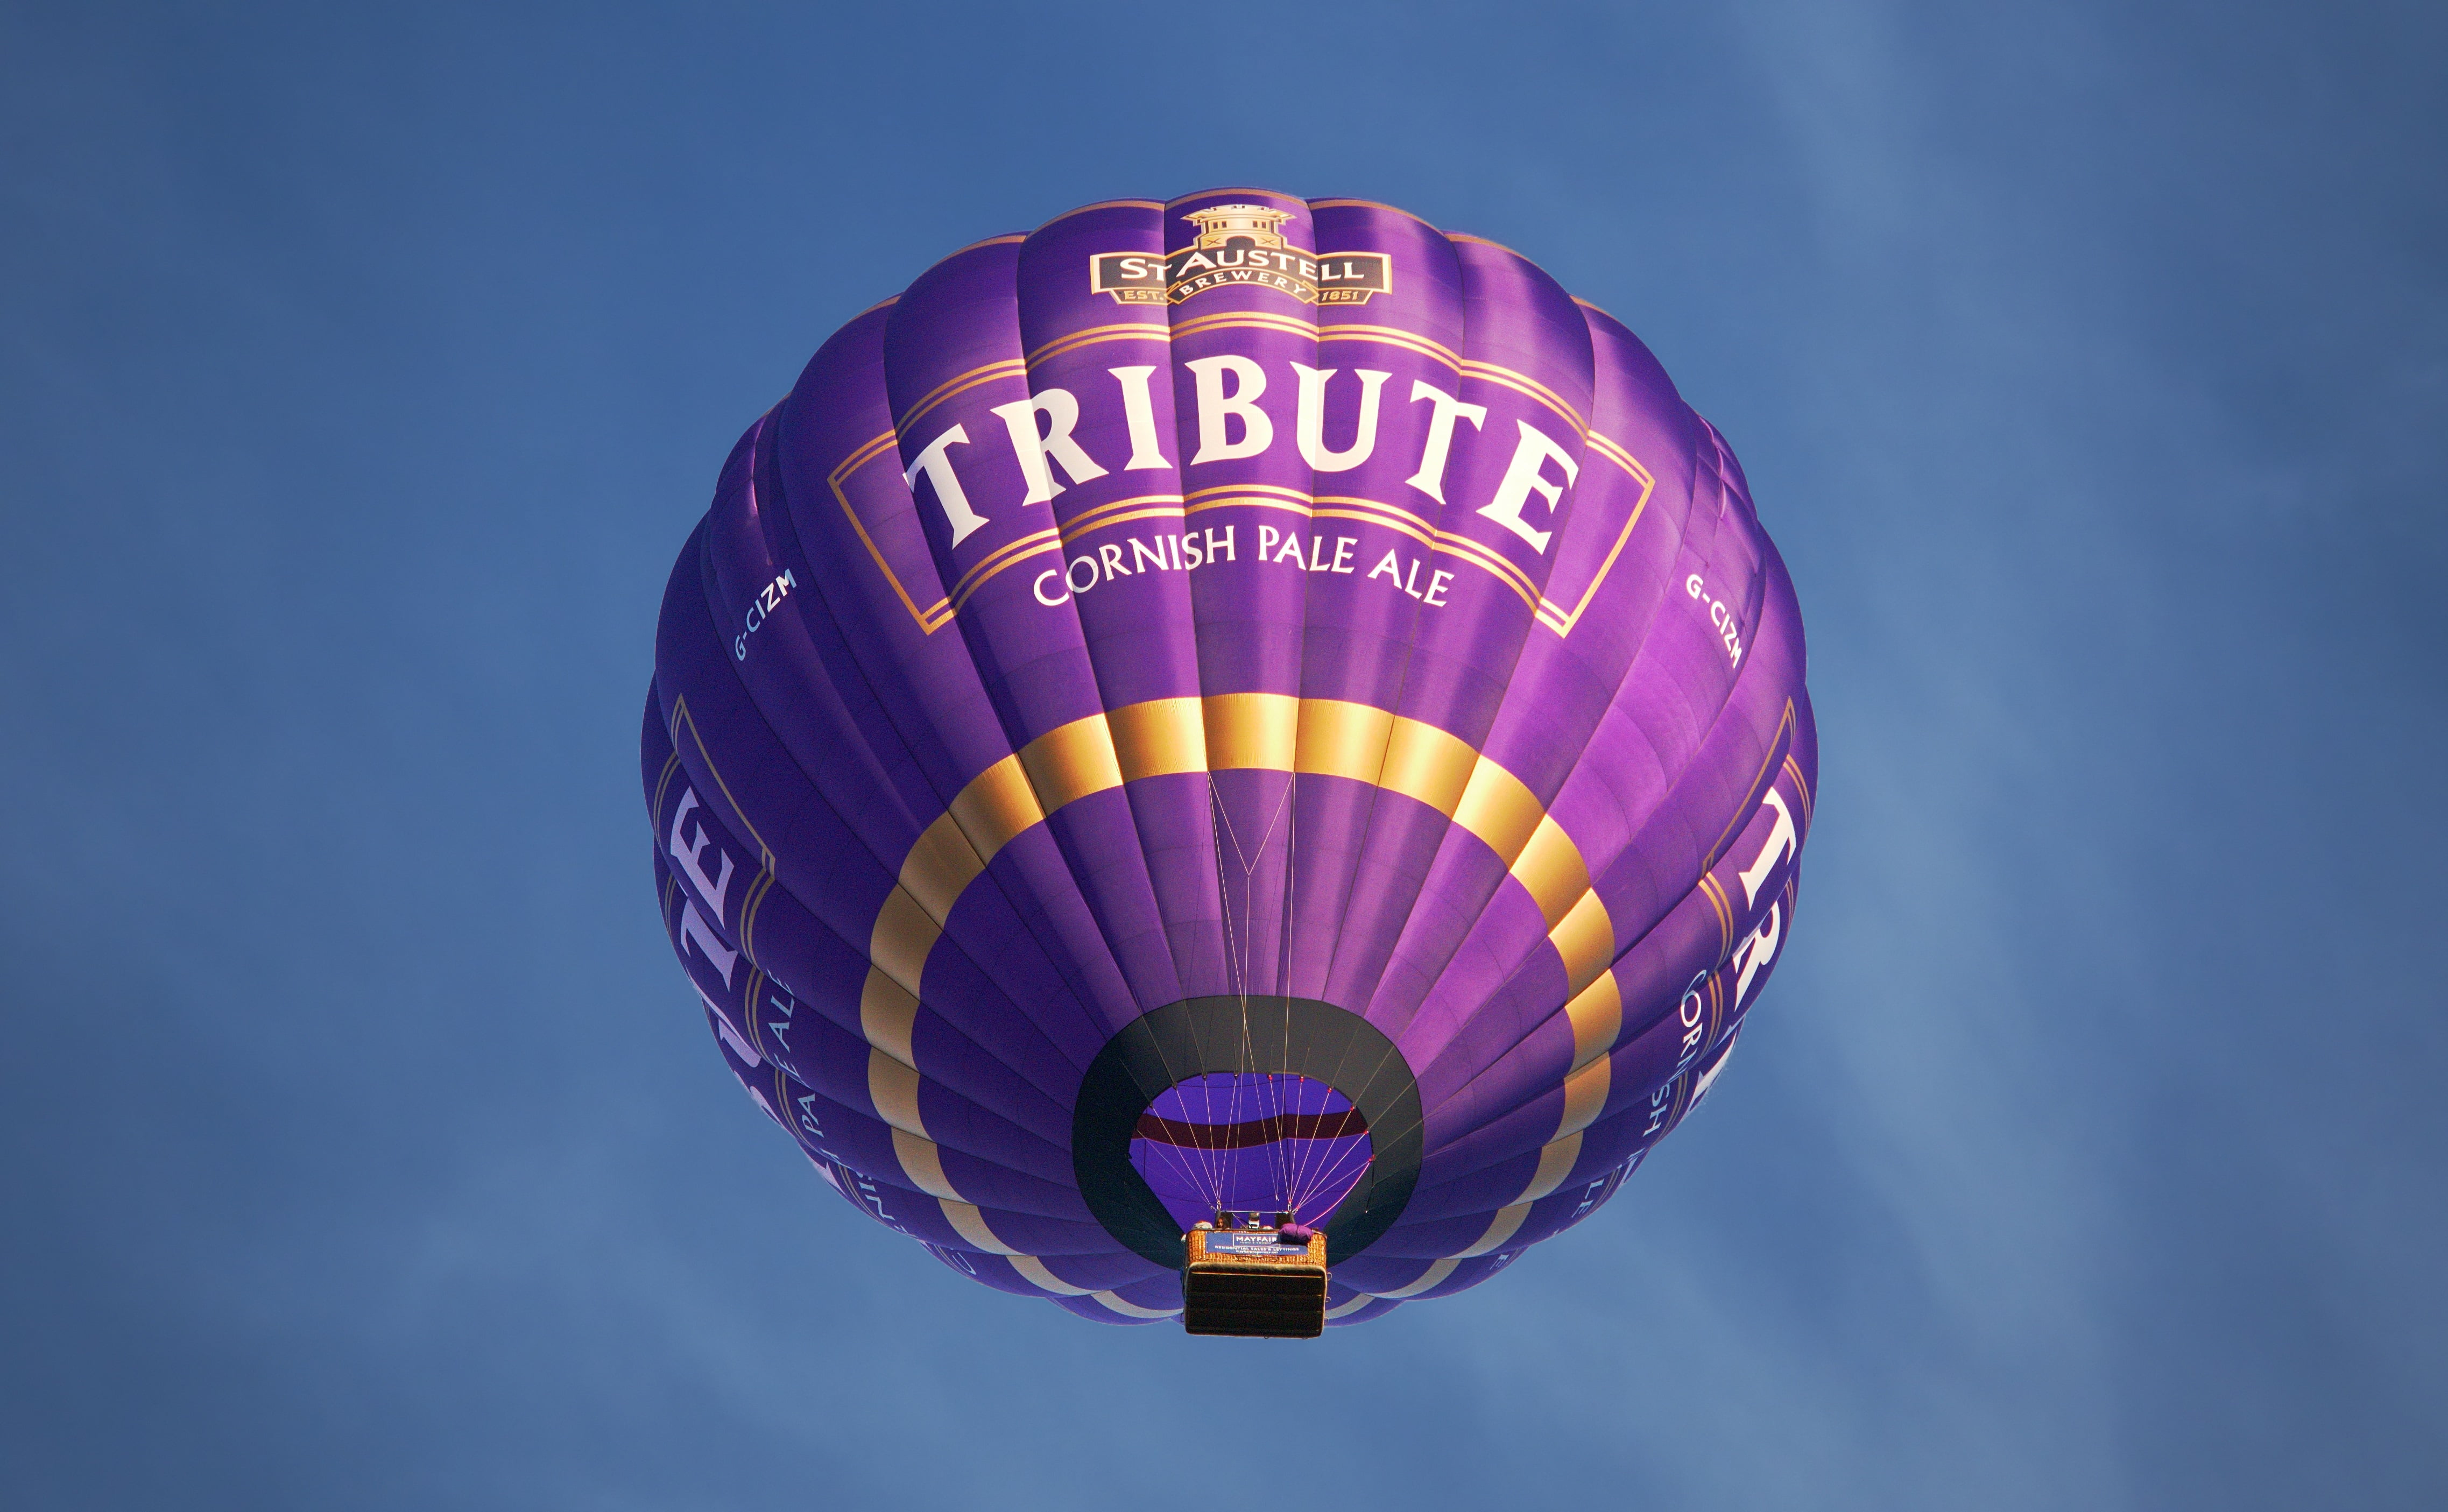 purple hot air balloon flying during dayime